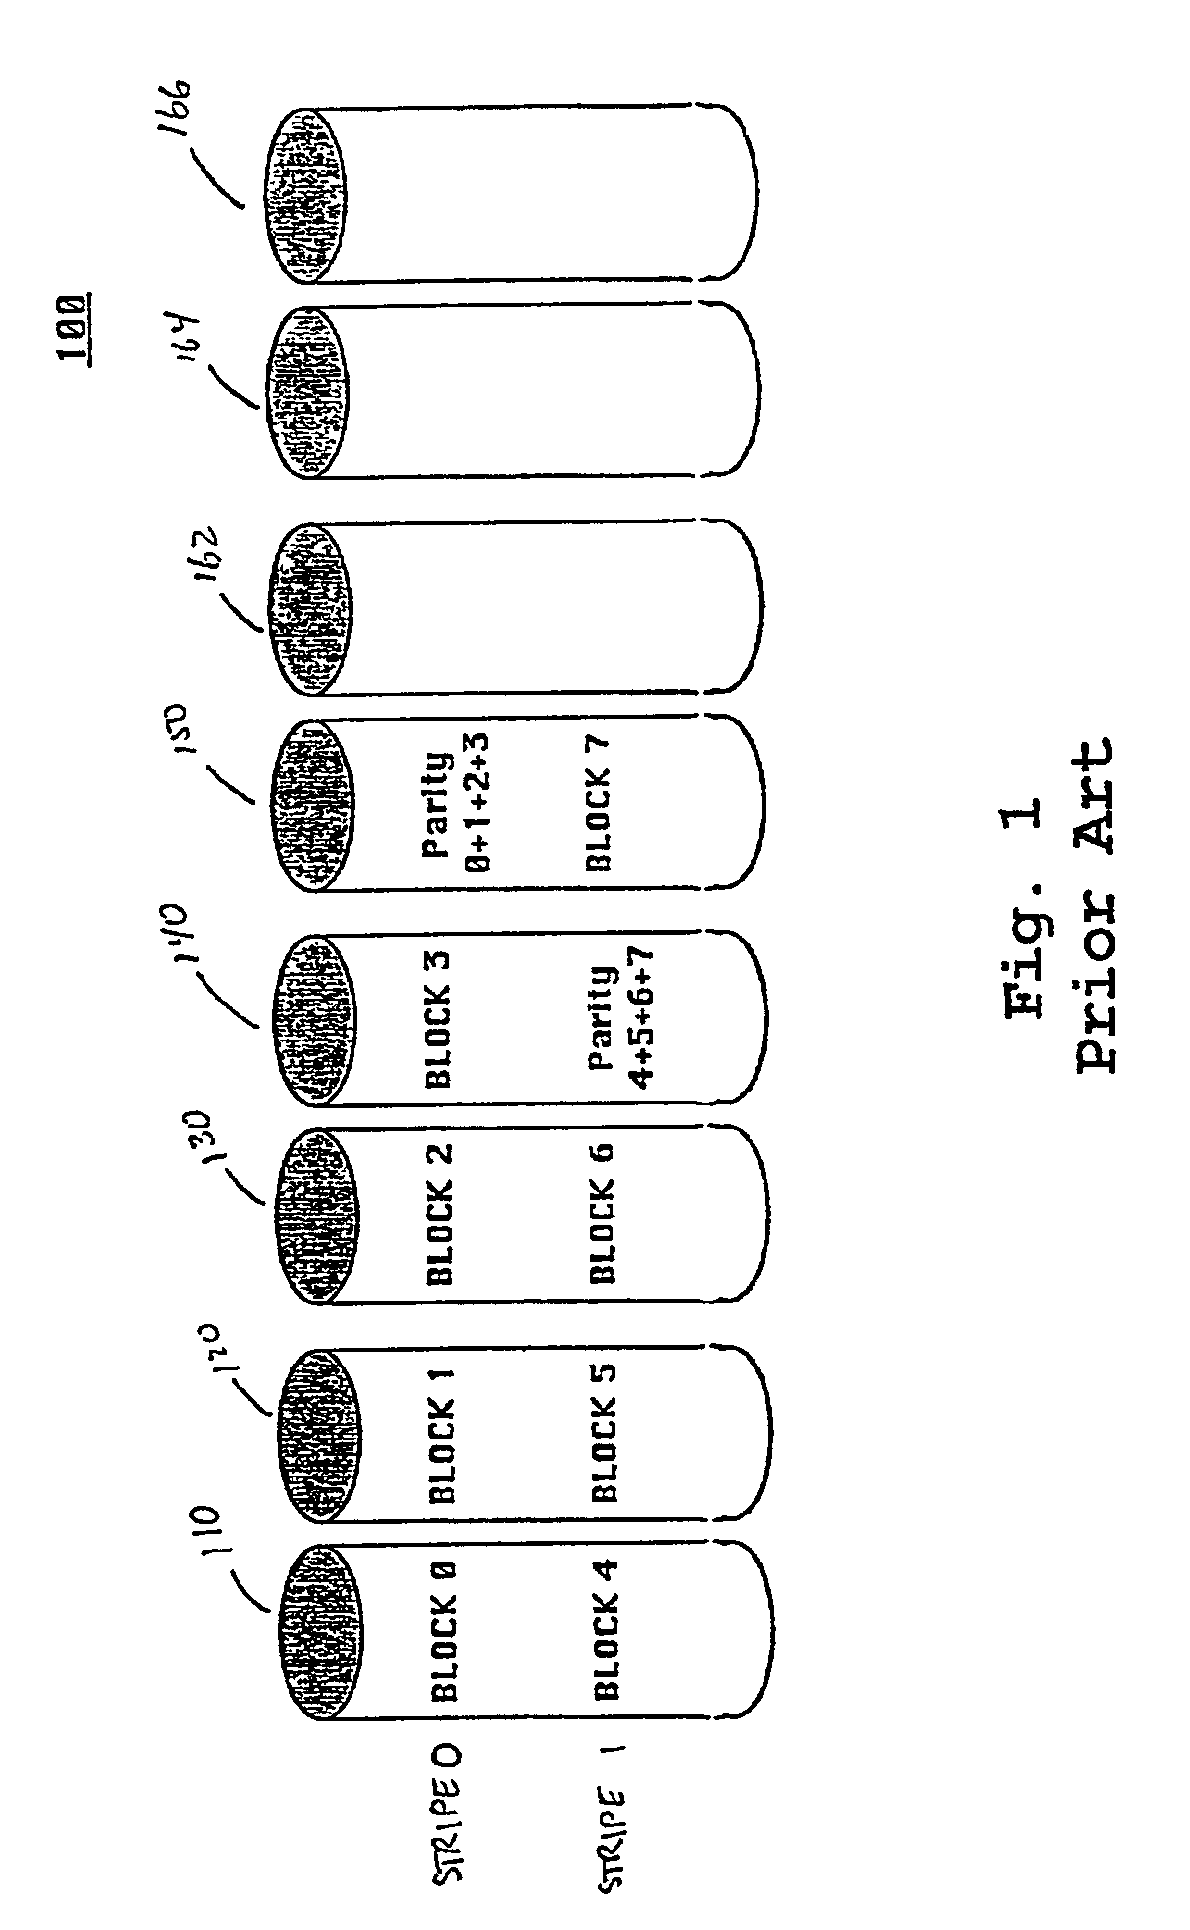 Method and system for leveraging spares in a data storage system including a plurality of disk drives